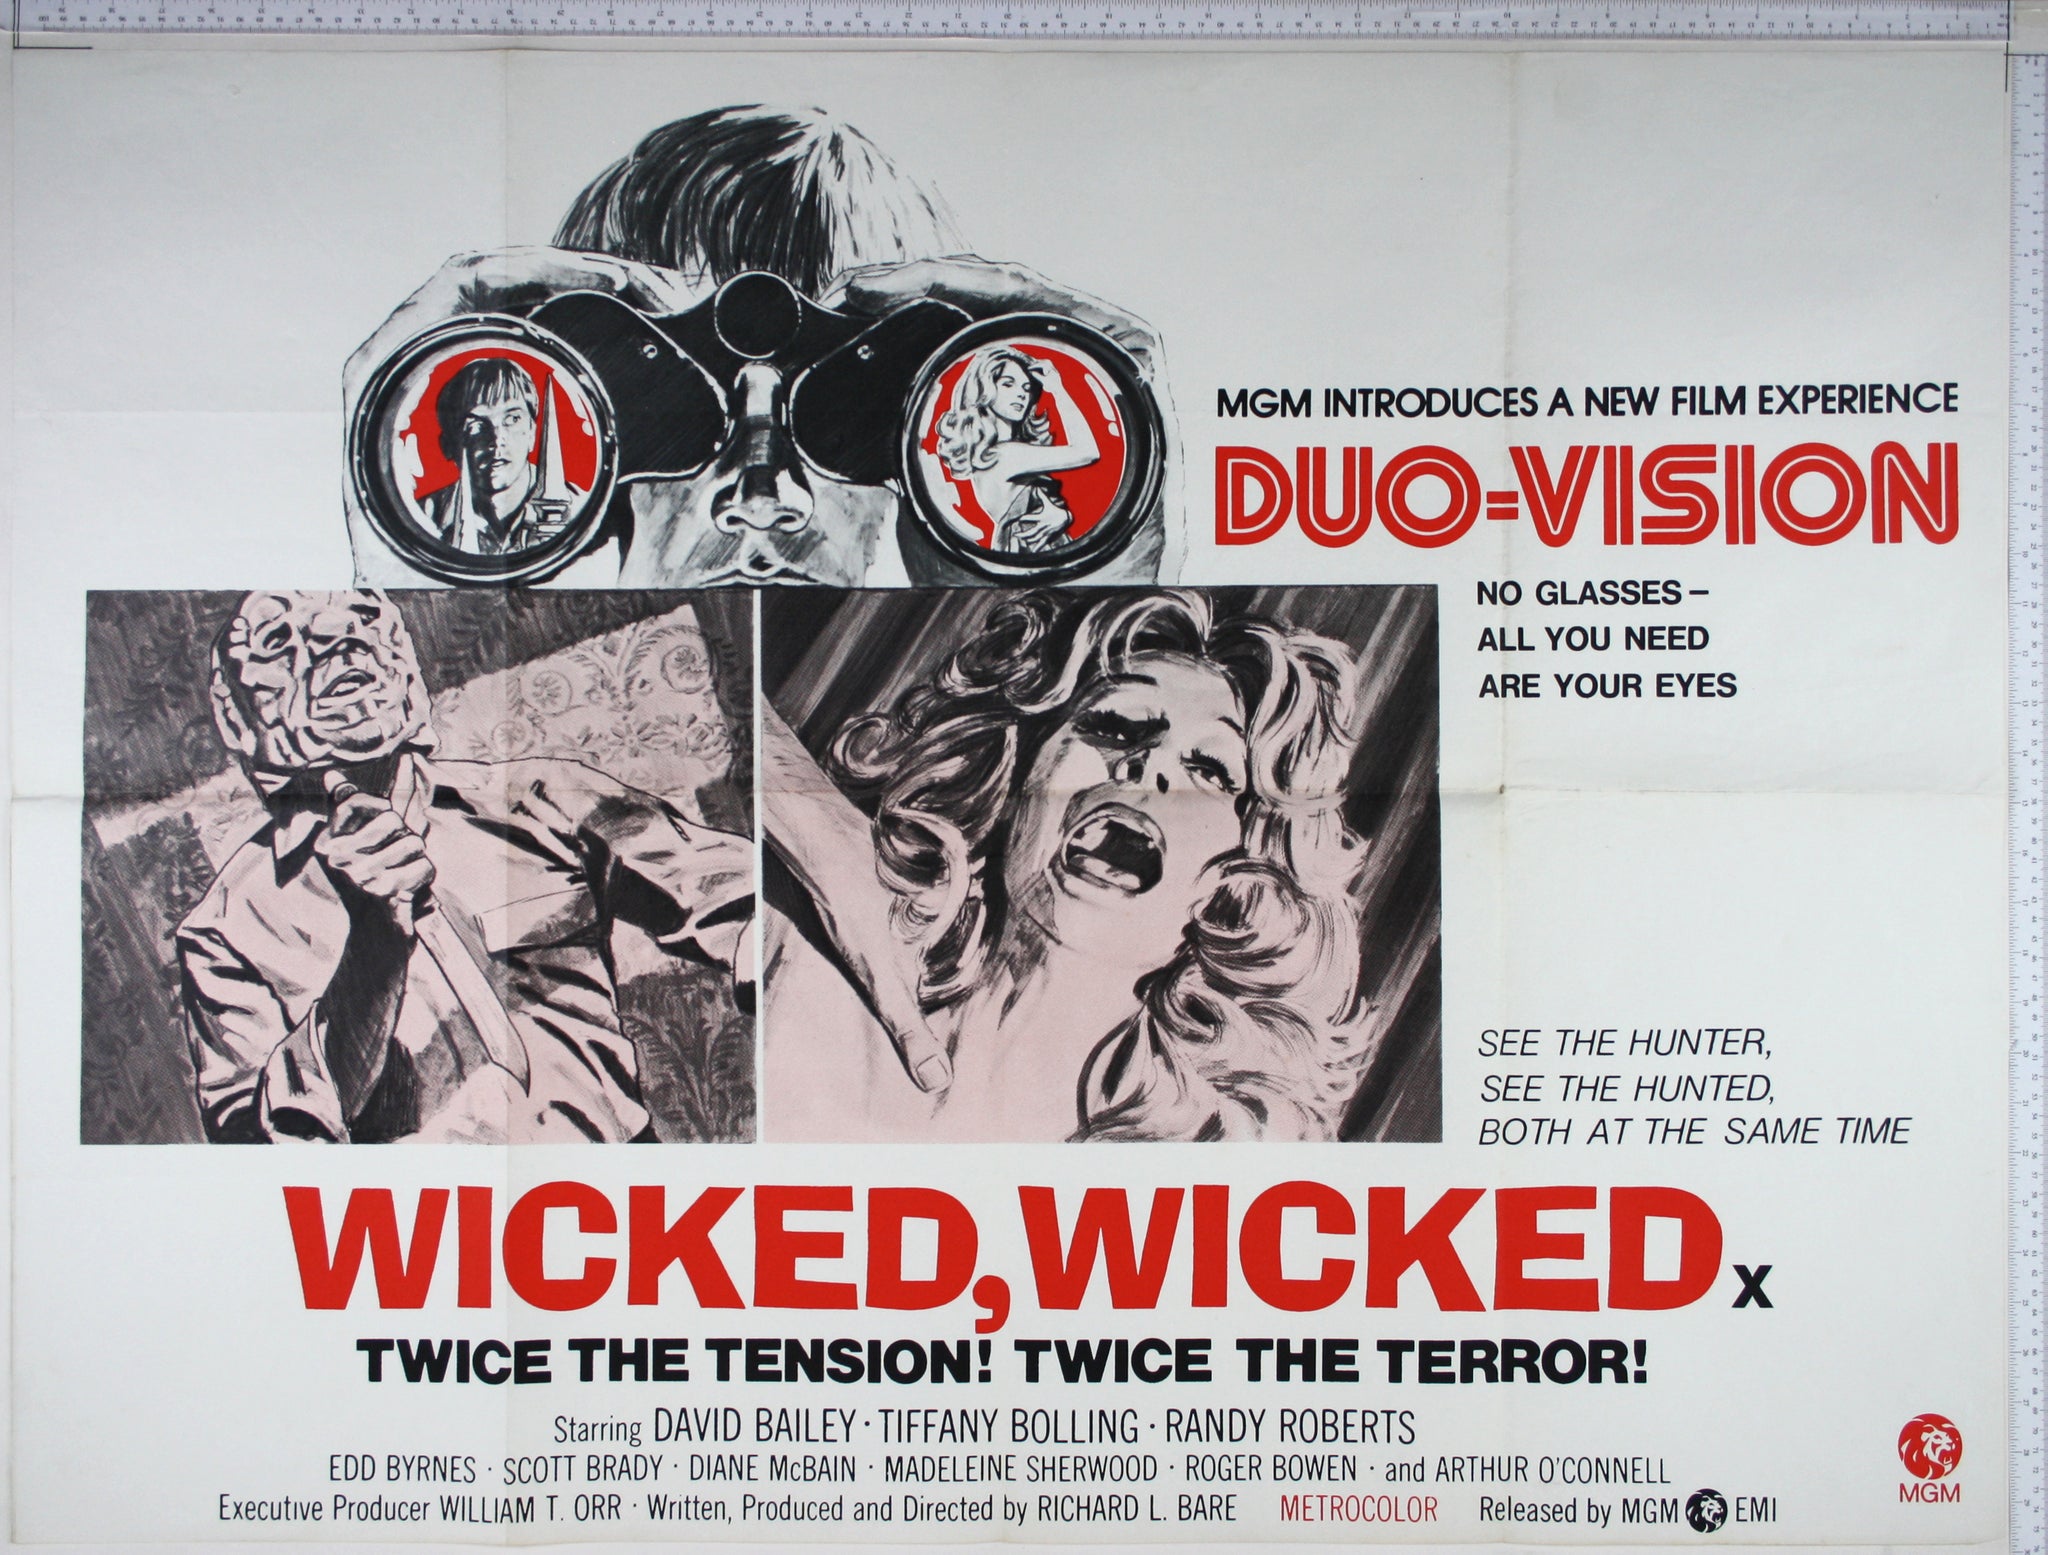 Graphic artwork of boy with binoculars, lenses showing boy beind railings and sexy girl, inset of masked killer and screaming girl.